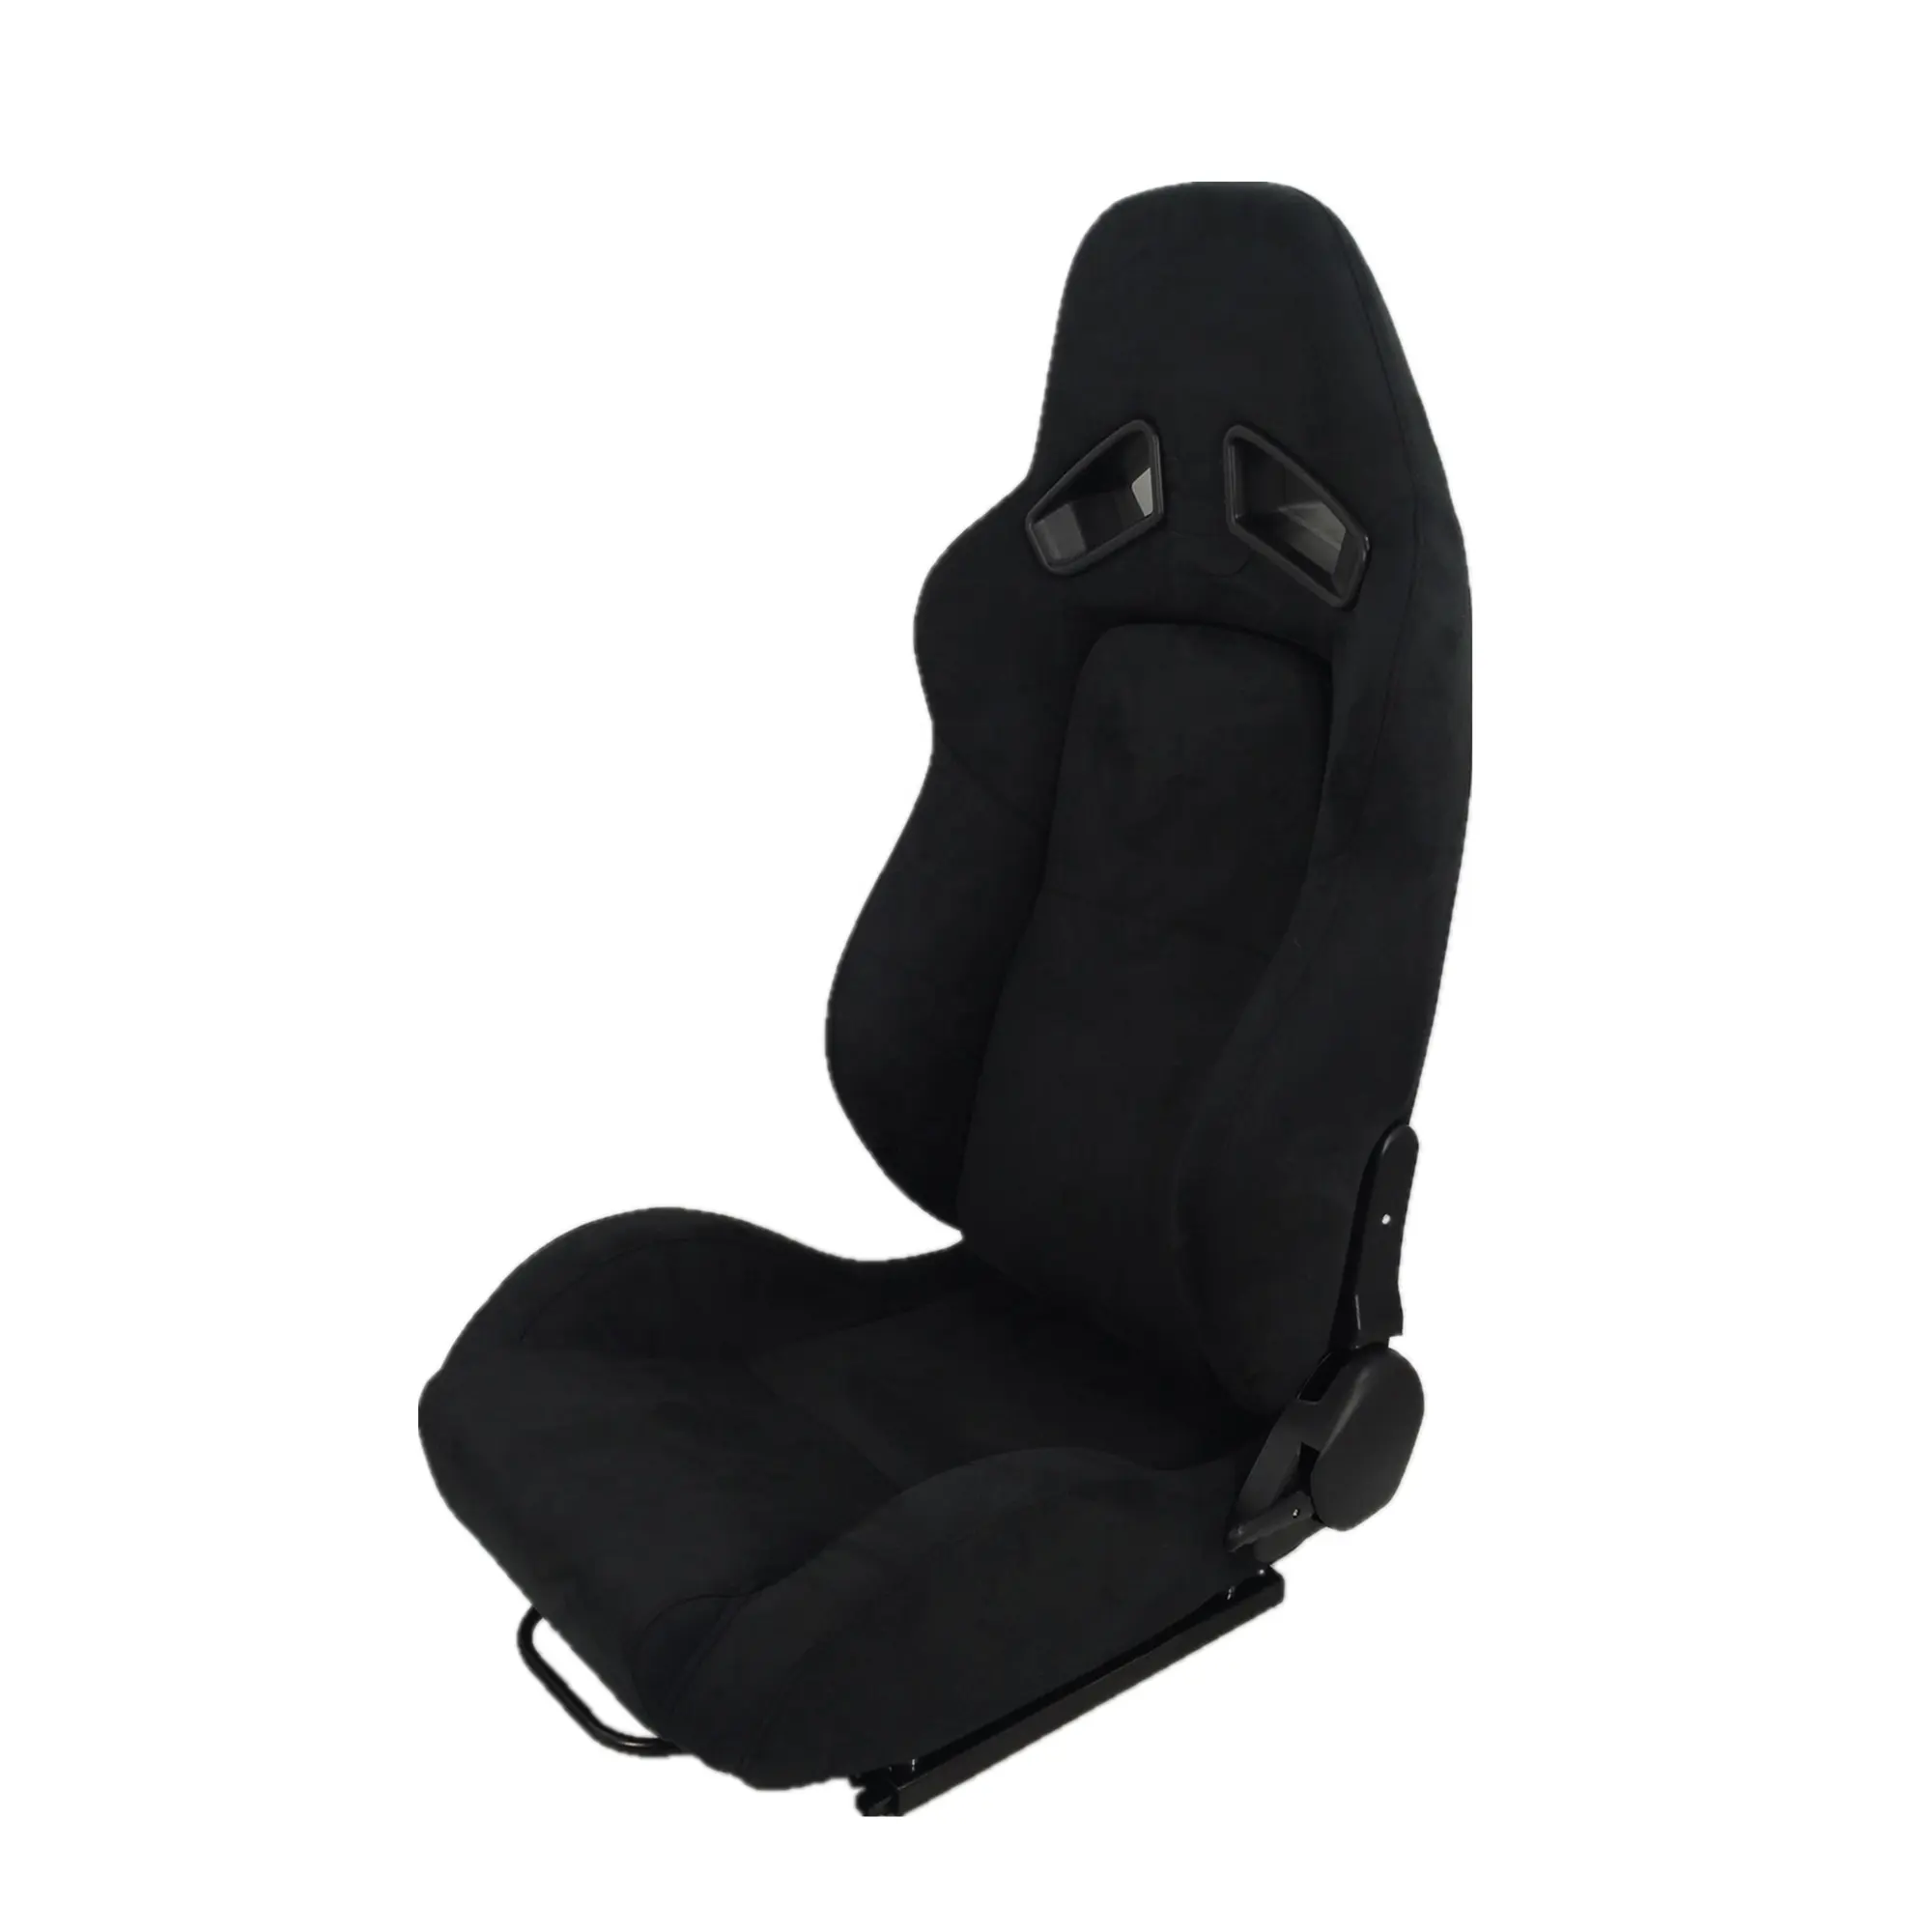 Racing Seat Black Suede With Single Slider Single Adjustor For Automobile Car Use SR7 Sports Racing Seat